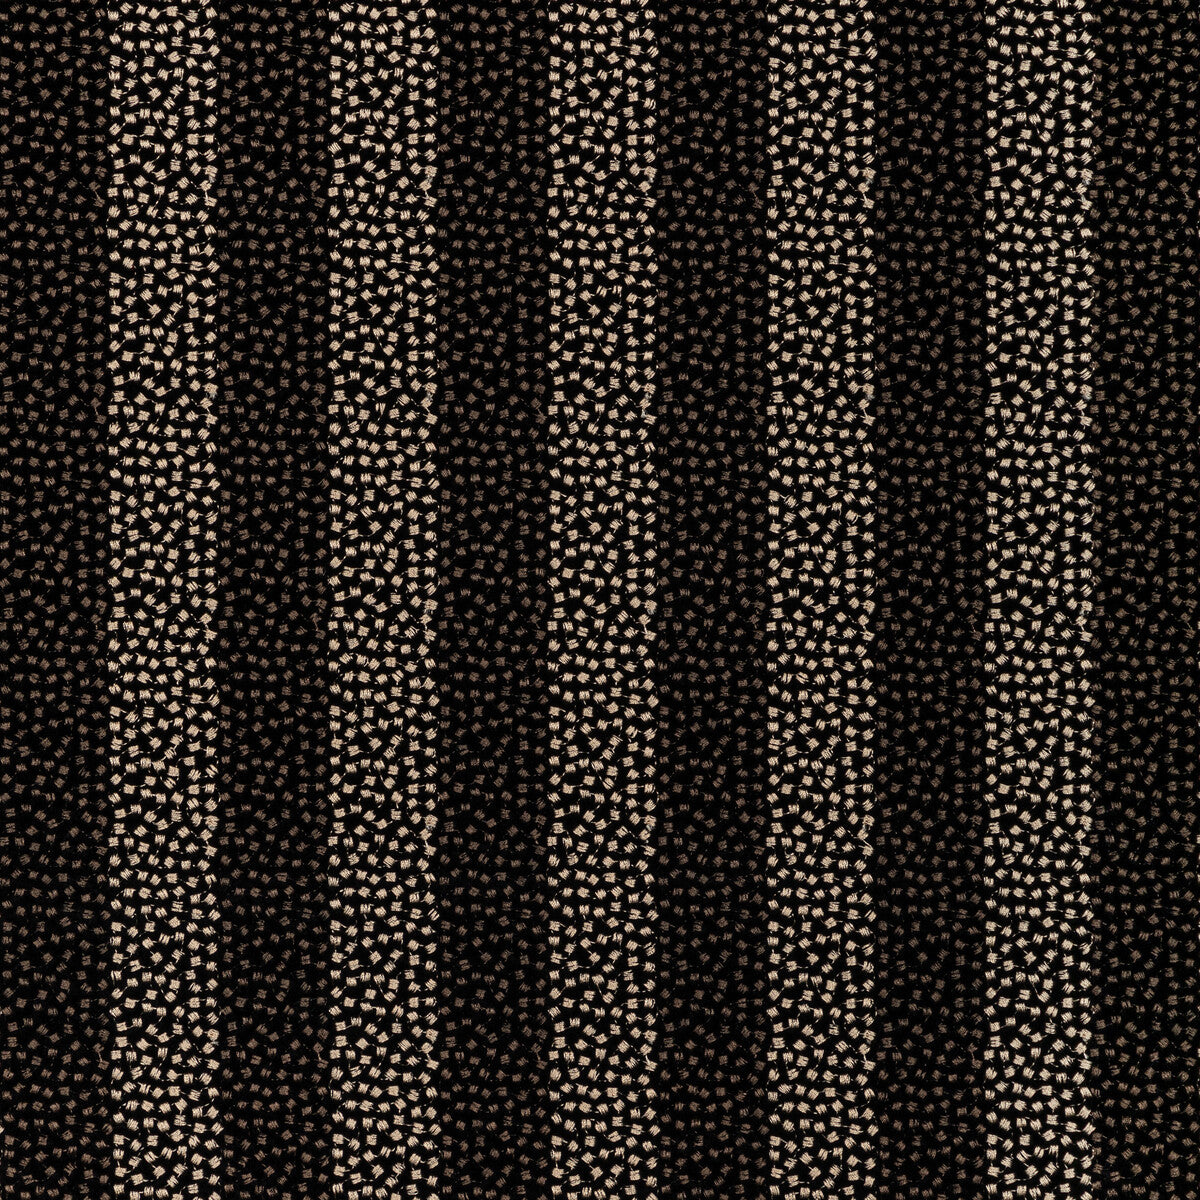 Proximity fabric in noir color - pattern 36341.8.0 - by Kravet Couture in the Modern Luxe III collection